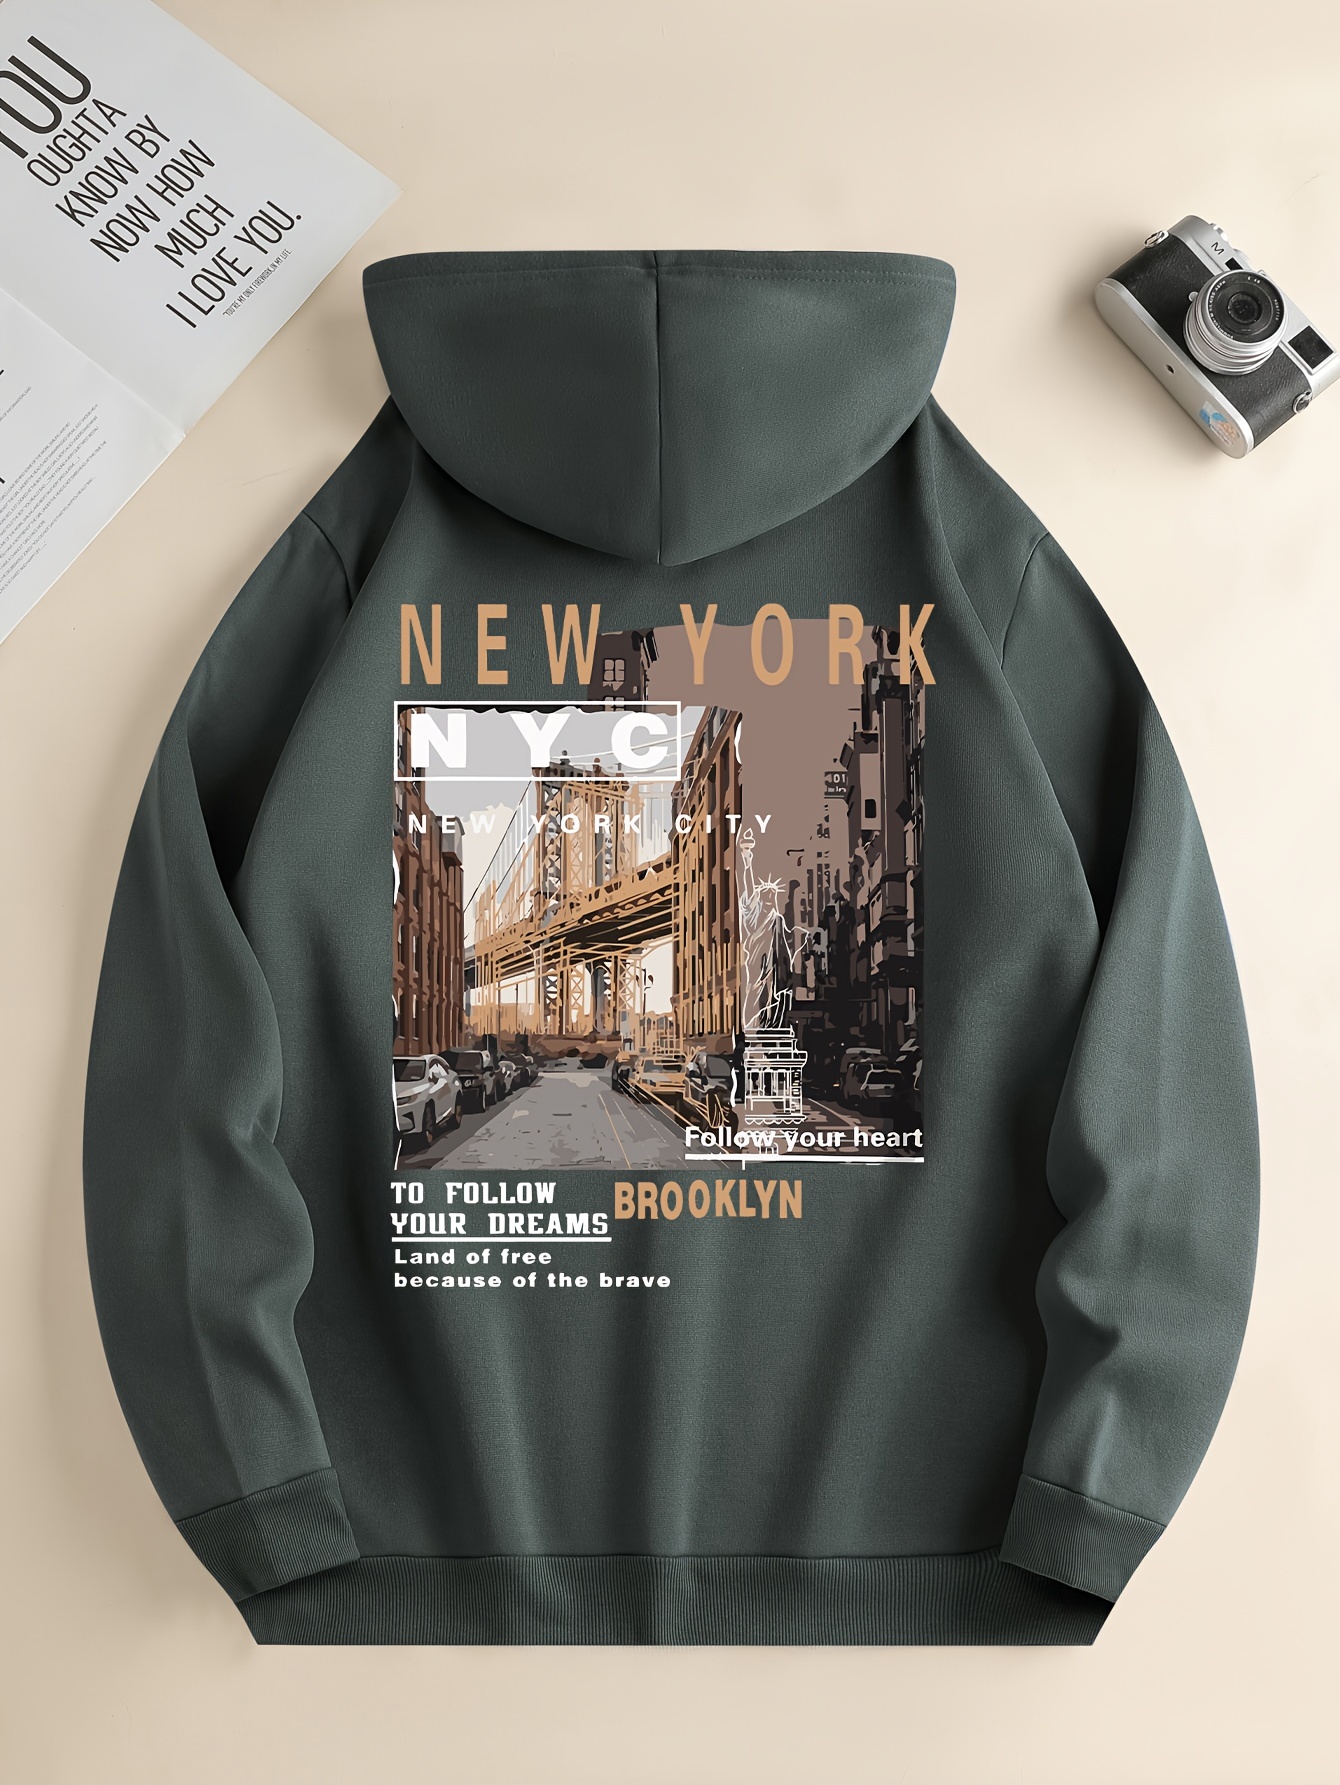 Hoodies For Men Fashion Casual New York Graphic Print Drawstring Long  Sleeve Hooded Sweatshirts With Pocket